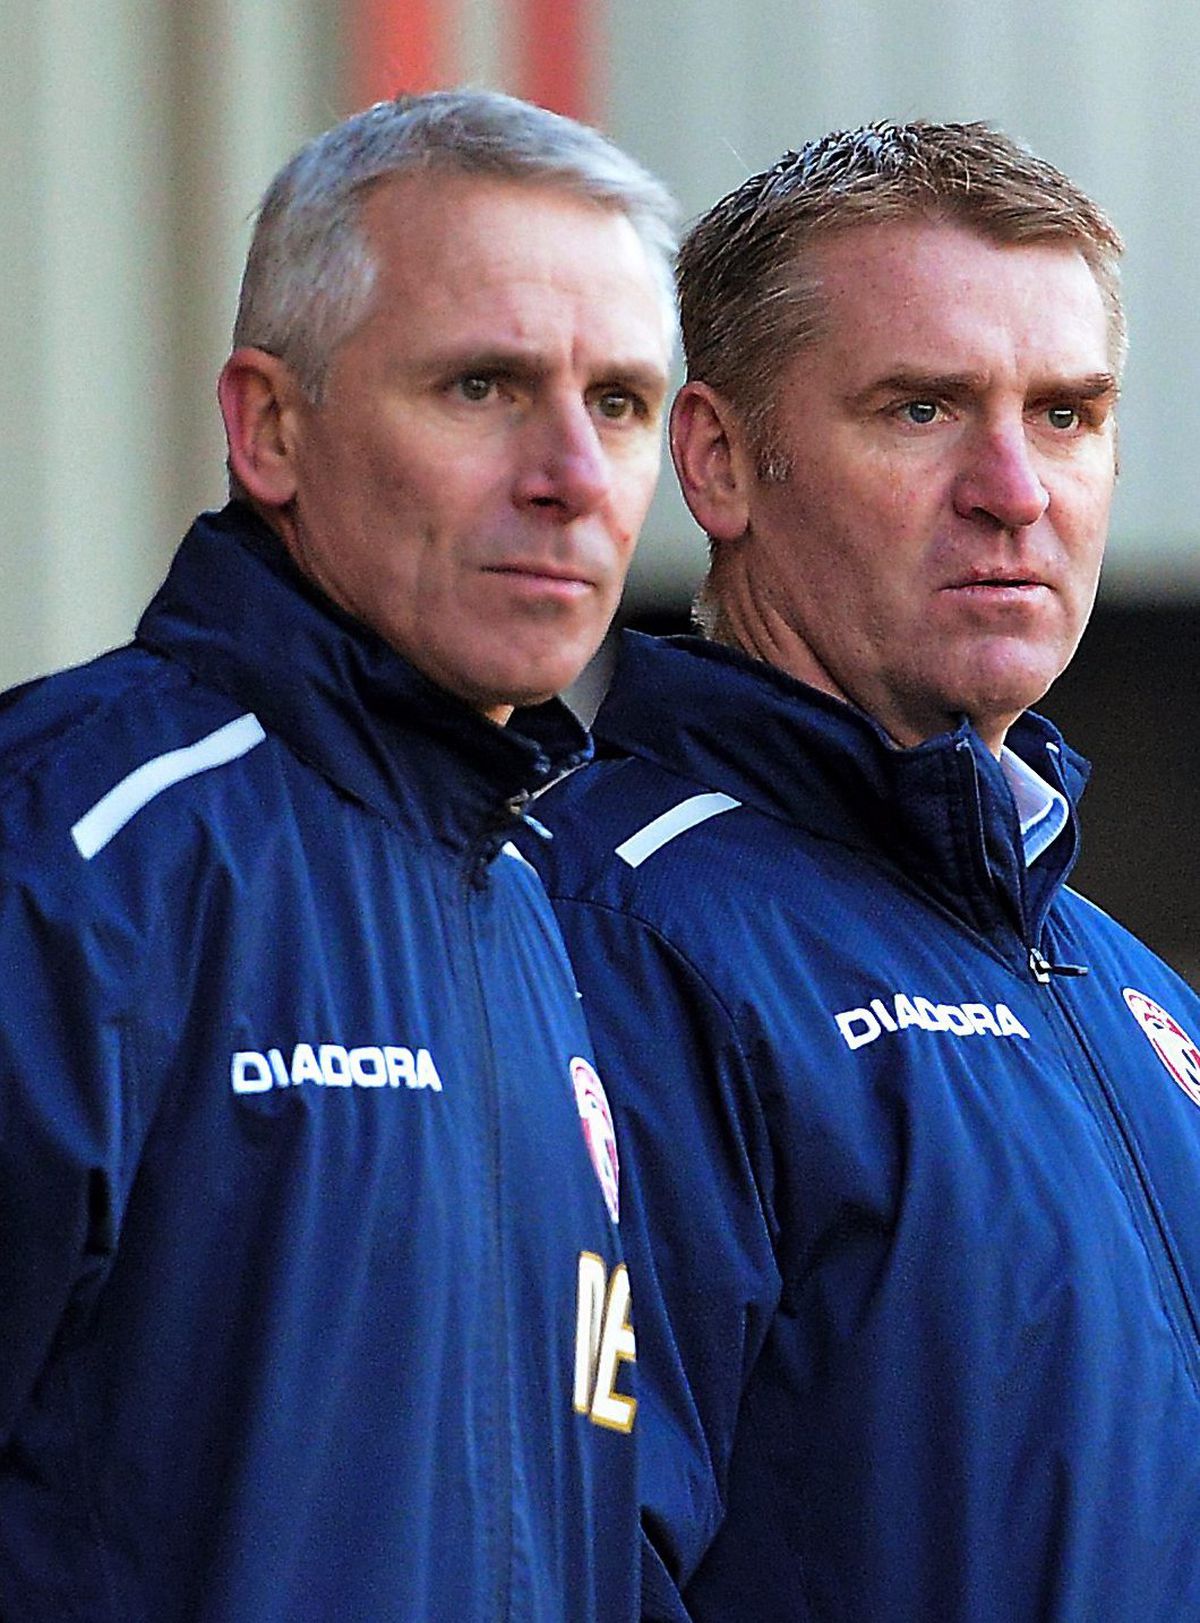 A coach at Walsall with Dean Smith